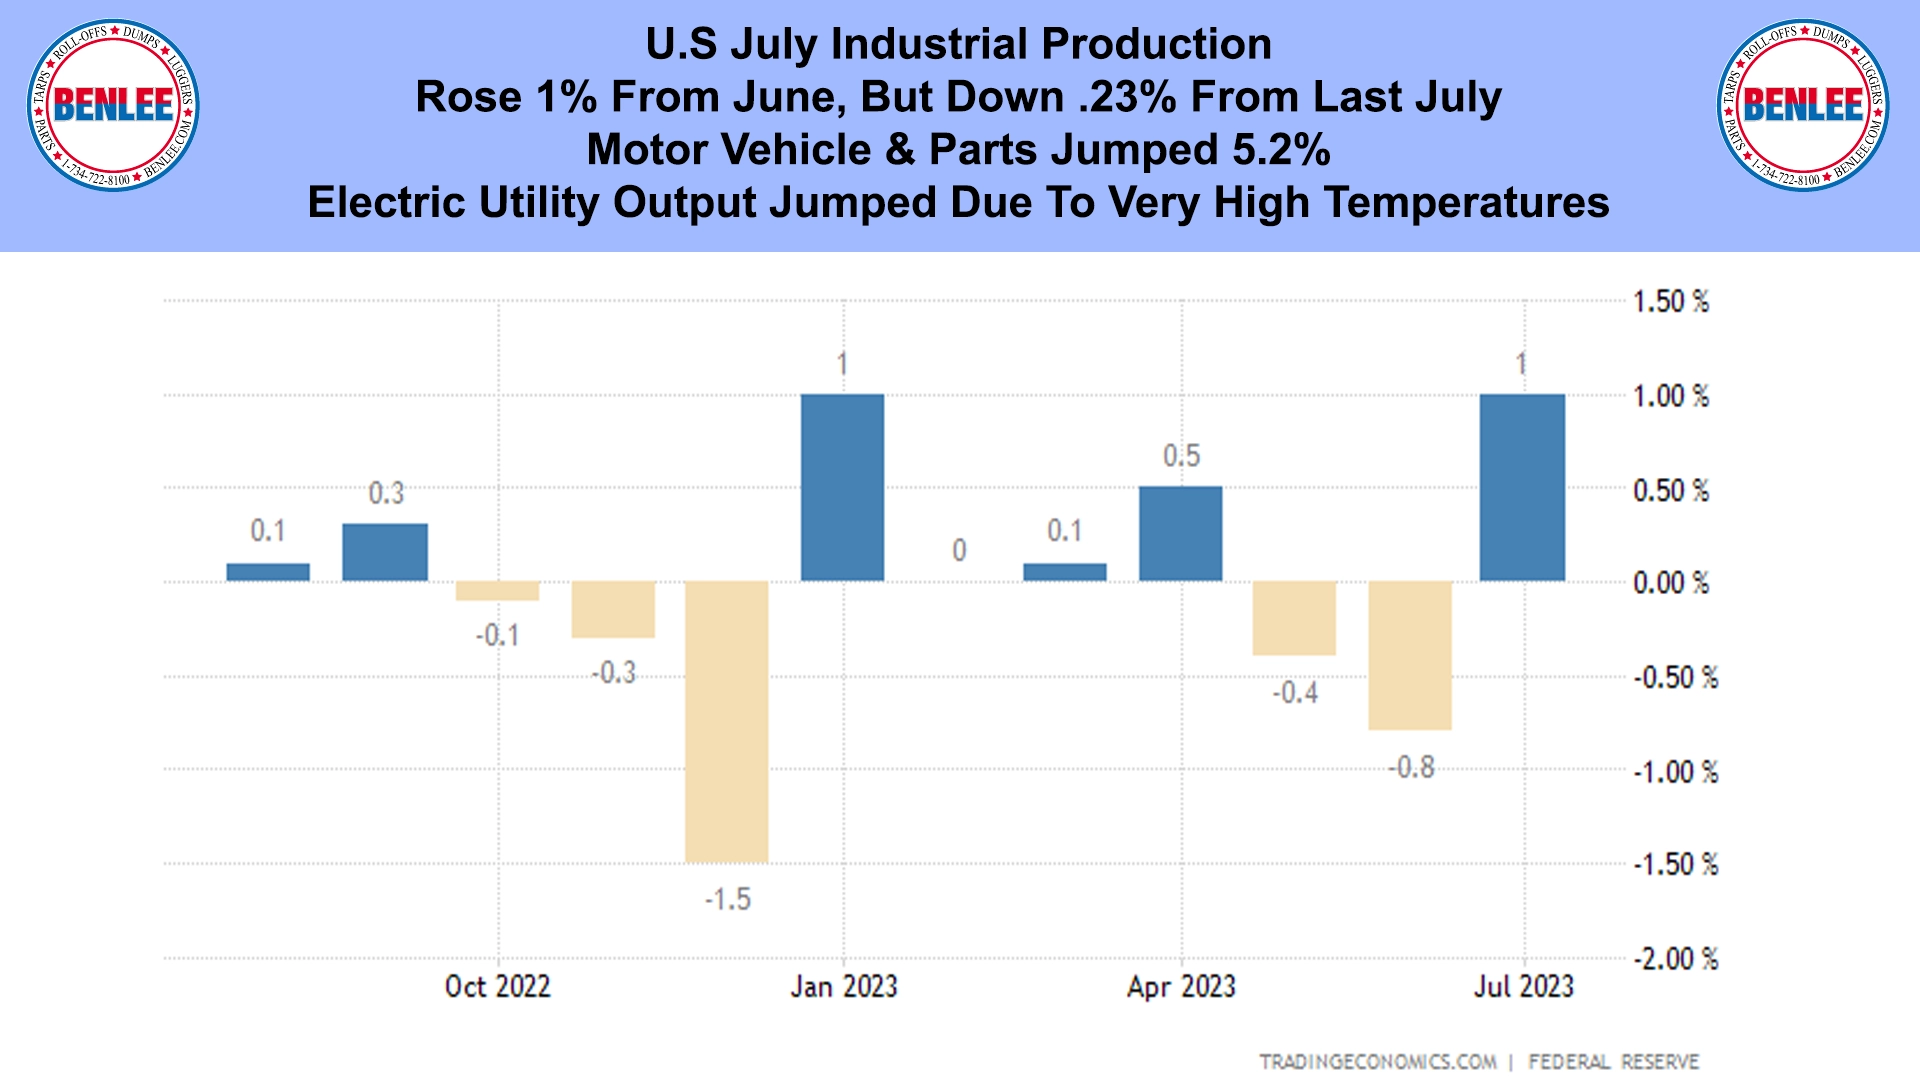 U.S July Industrial Production